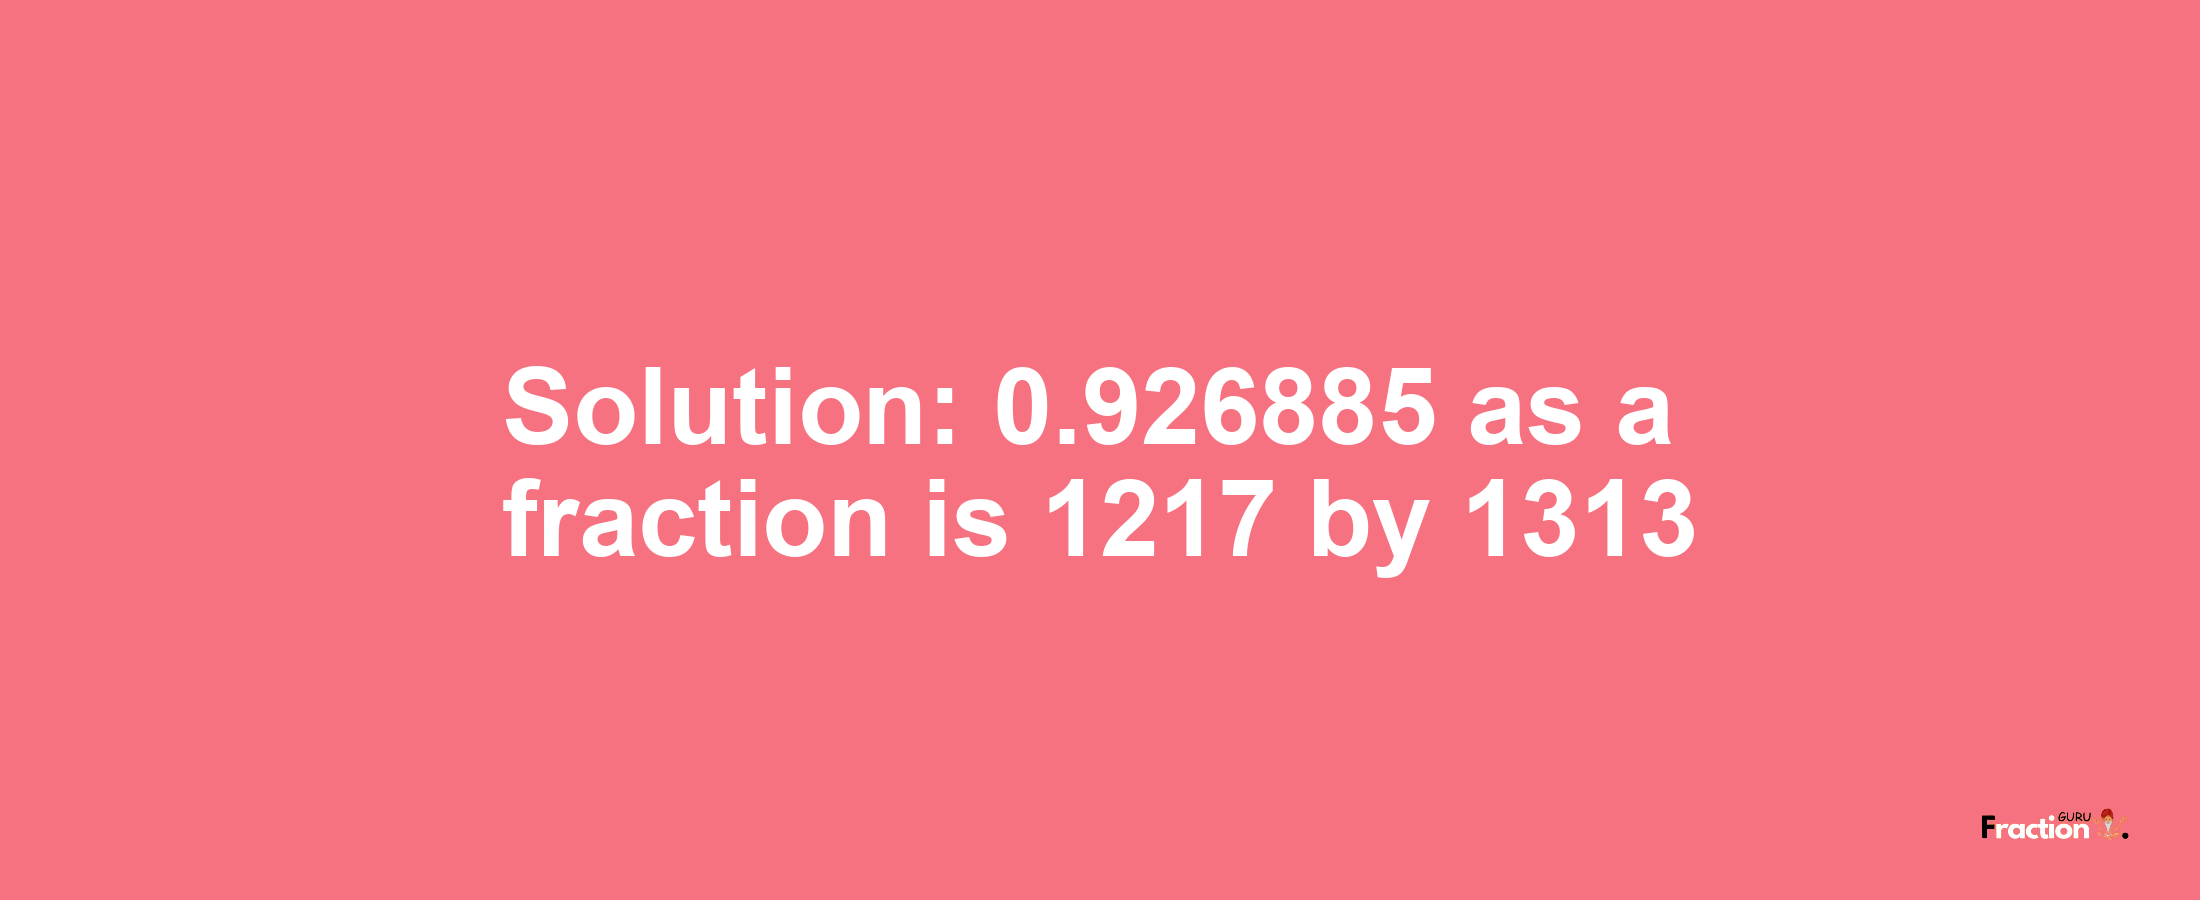 Solution:0.926885 as a fraction is 1217/1313